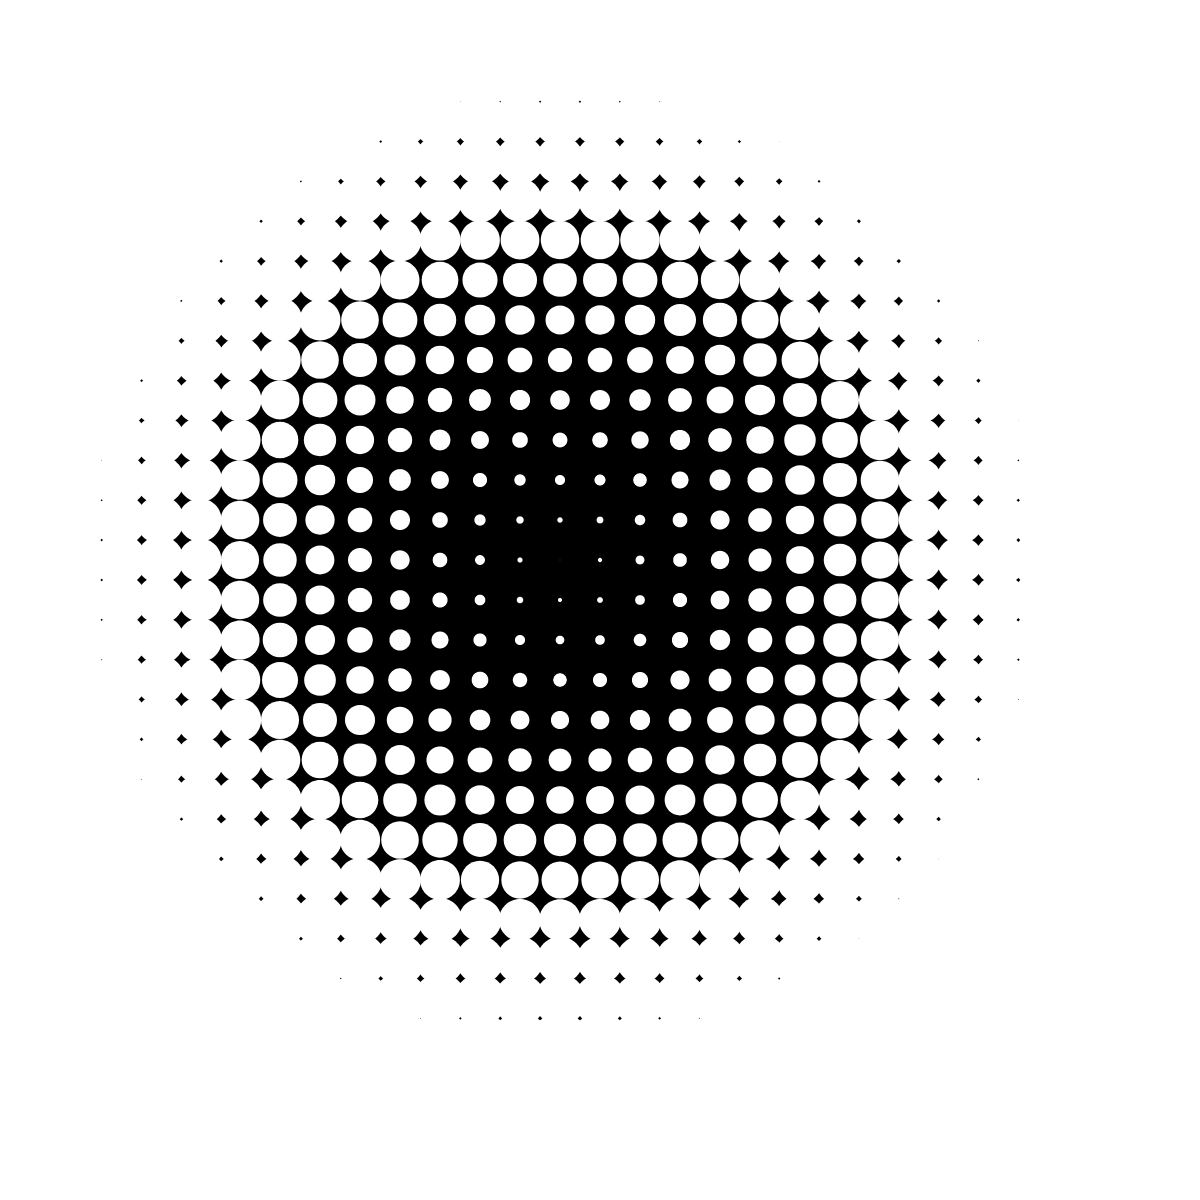 Moving dots